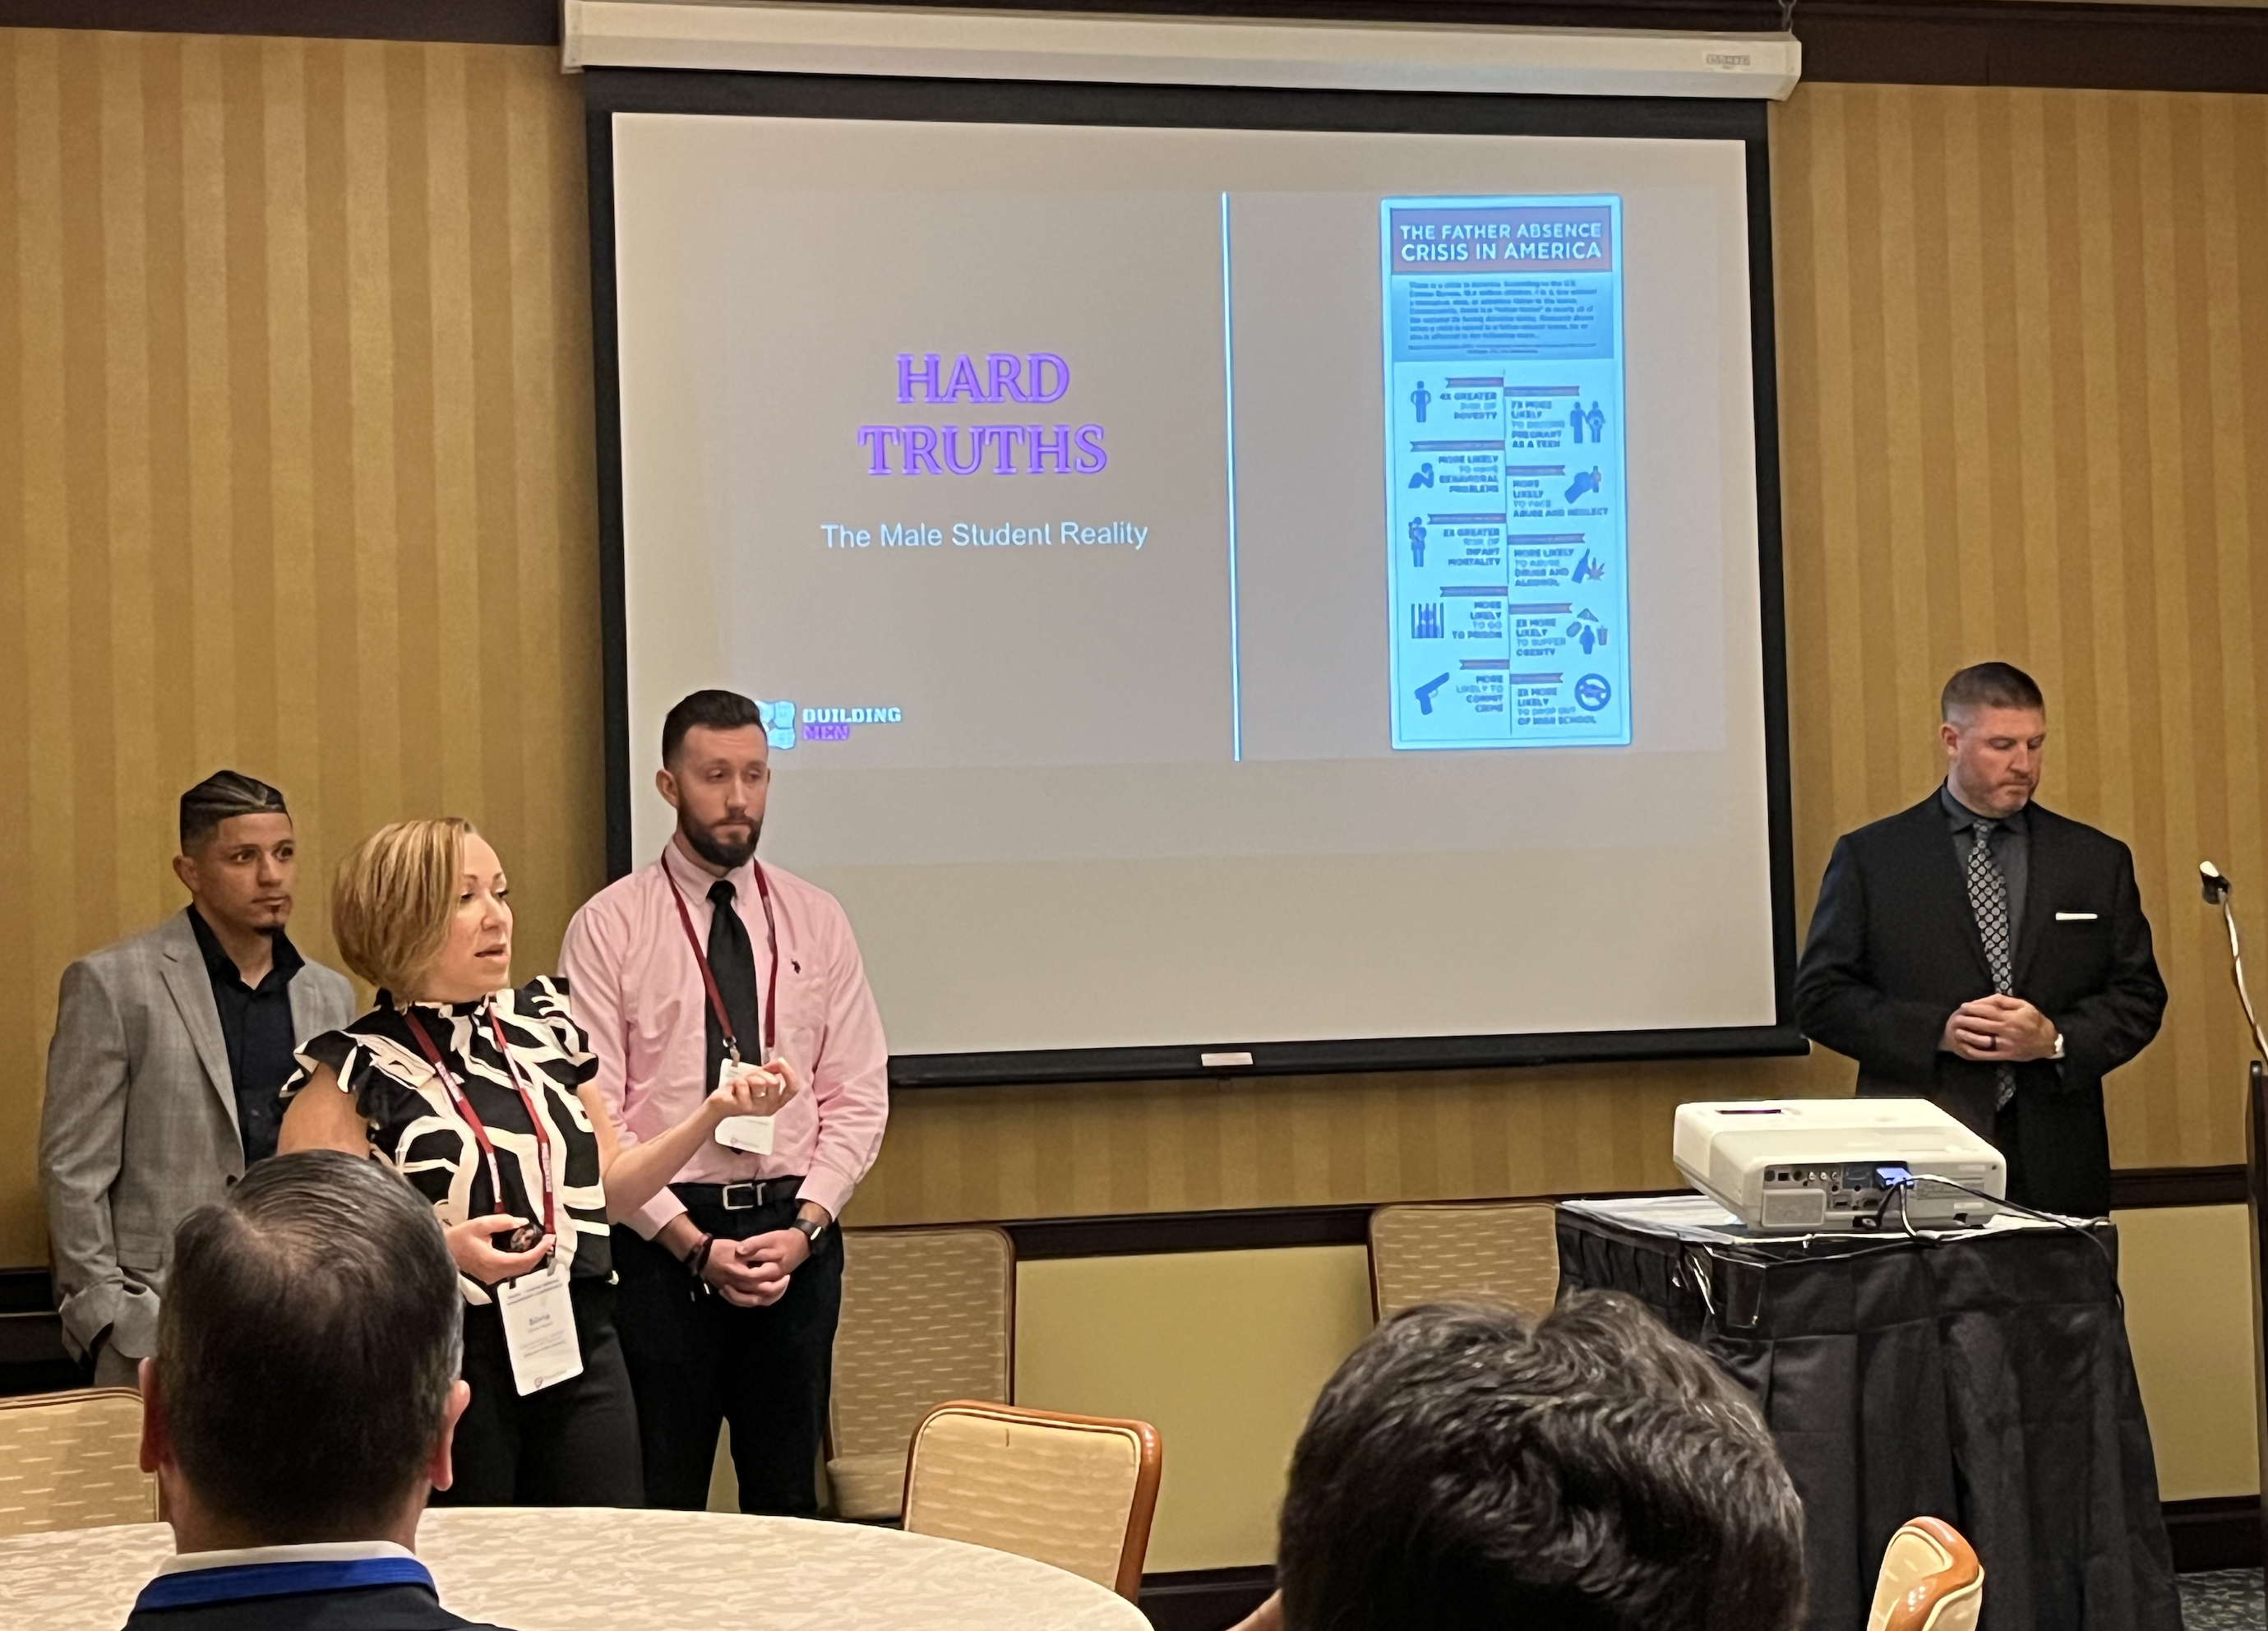 Dr. Silvia Pastor and Shamil Duran presented in Atlantic City about the Growing men program at Belleville Middle School